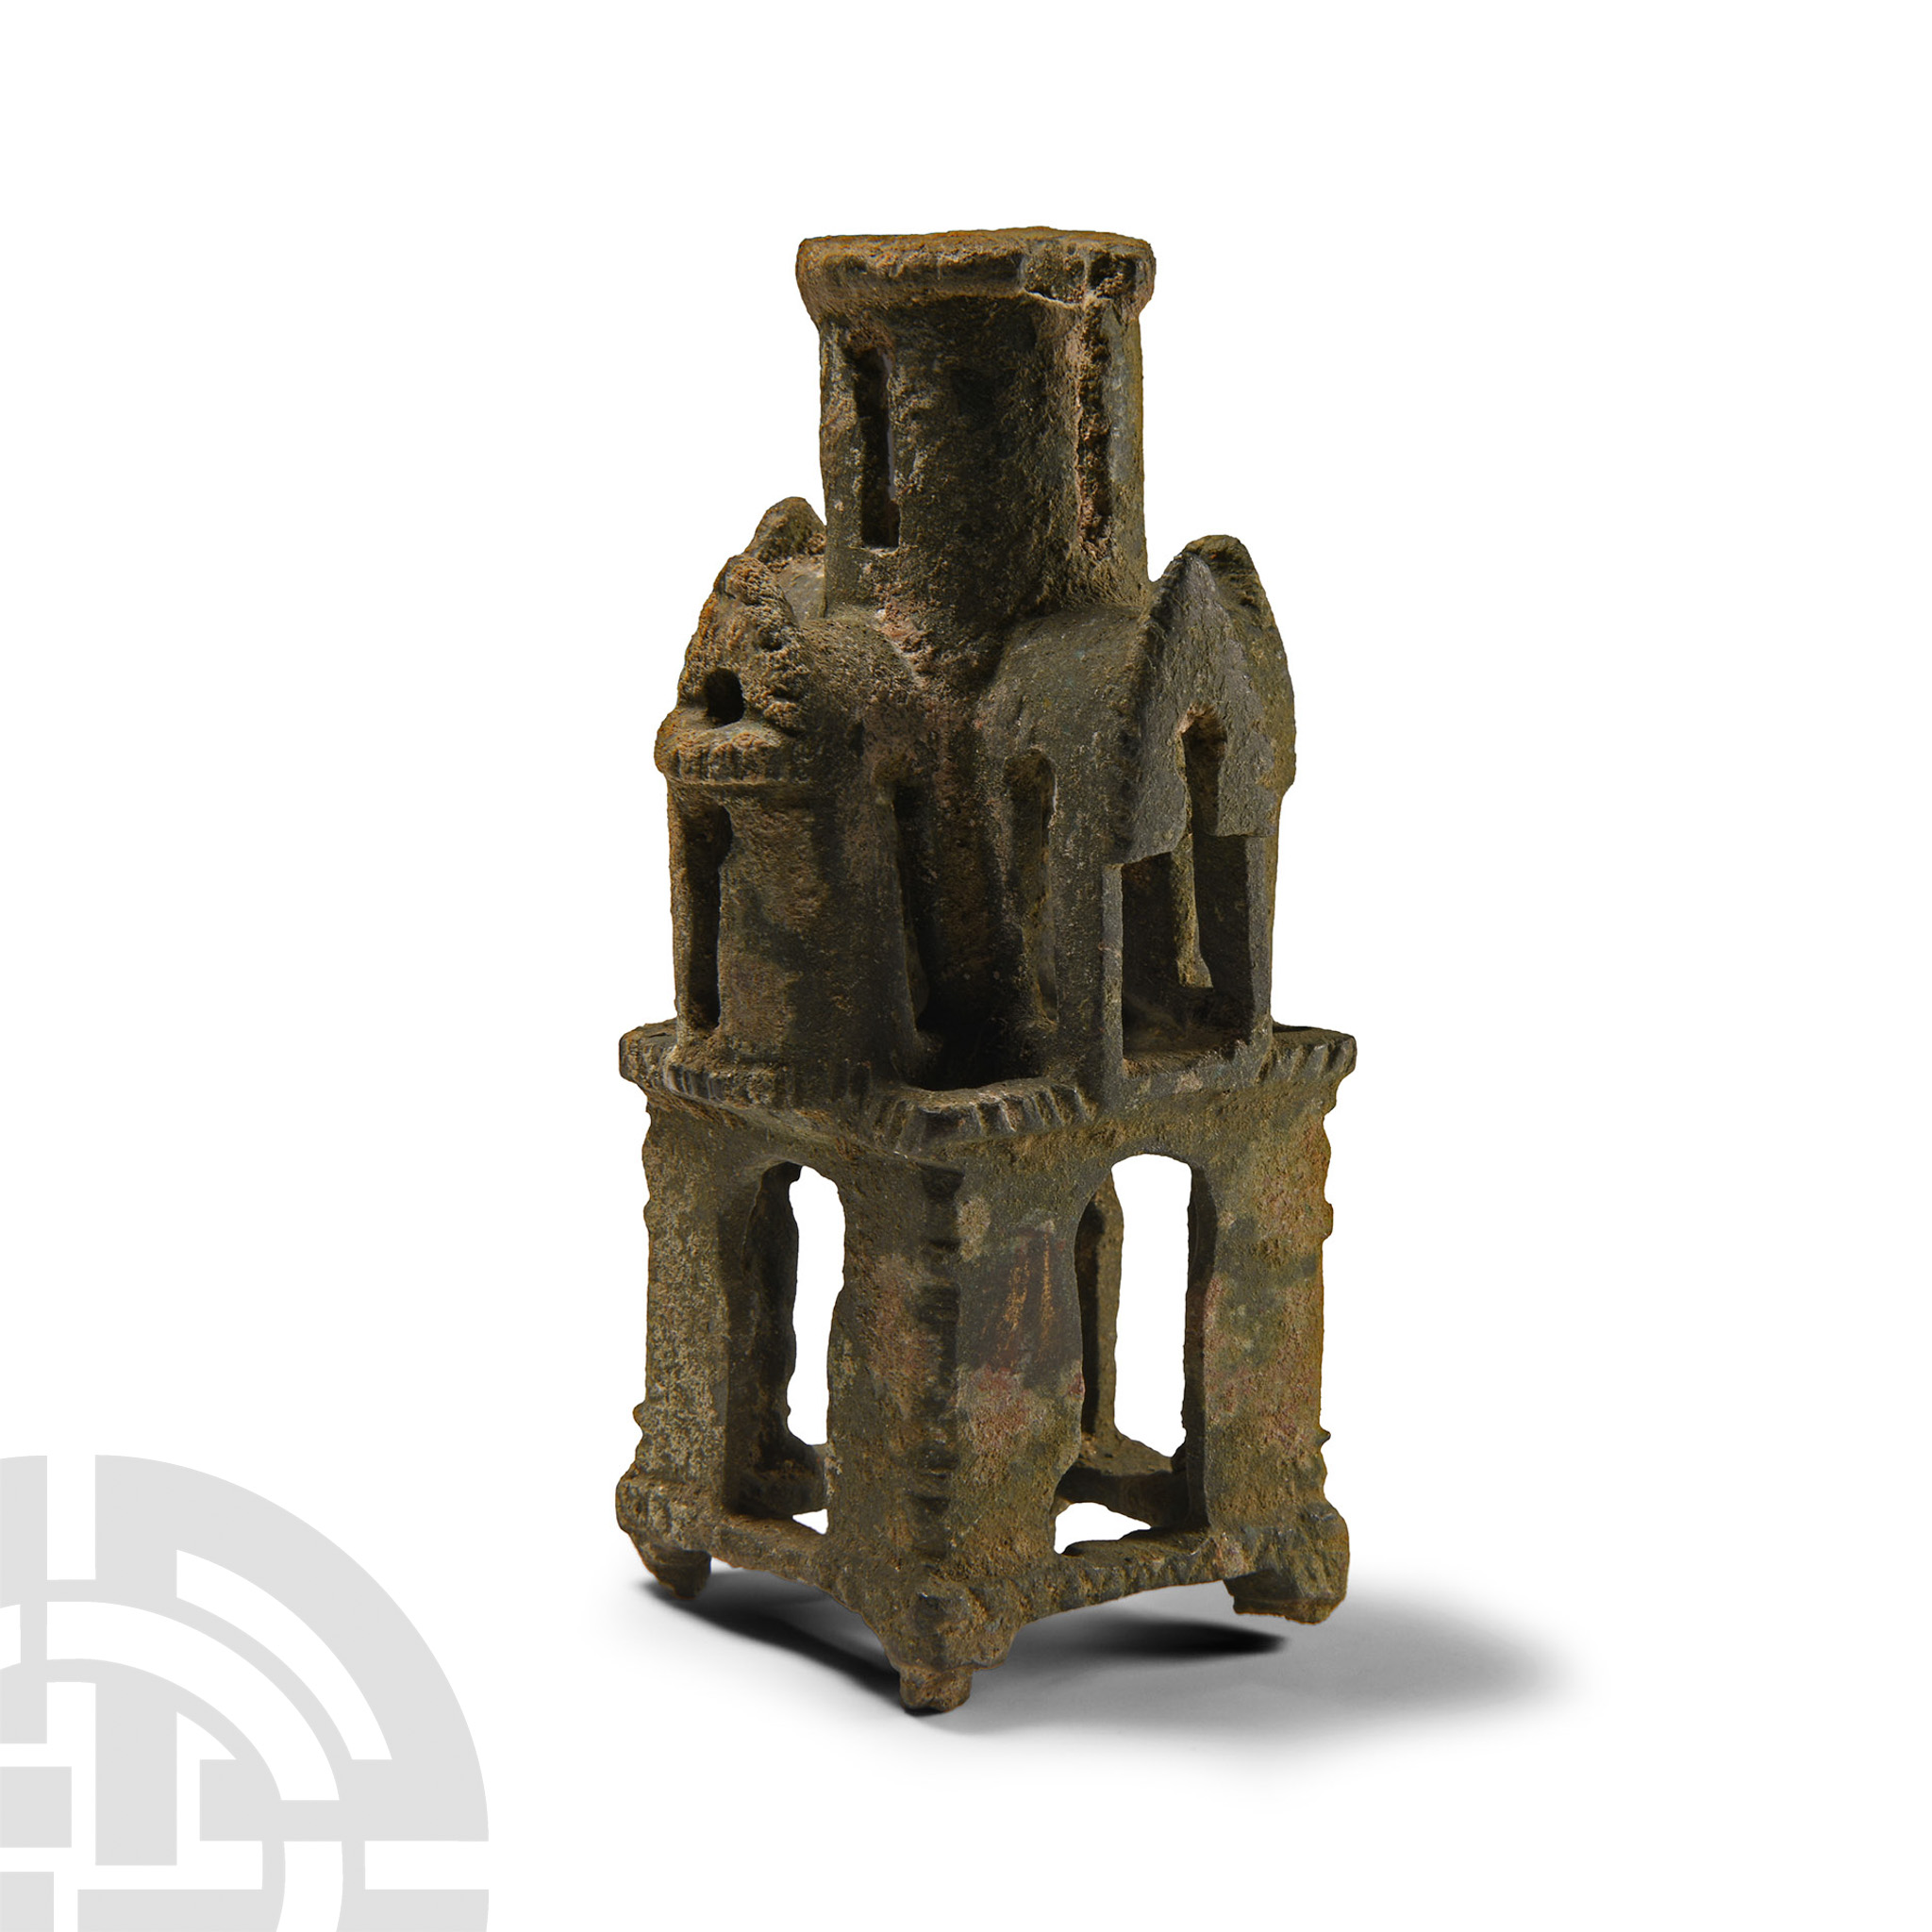 Byzantine Bronze Ecclesiastical Finial Support for a Cross - Image 2 of 2